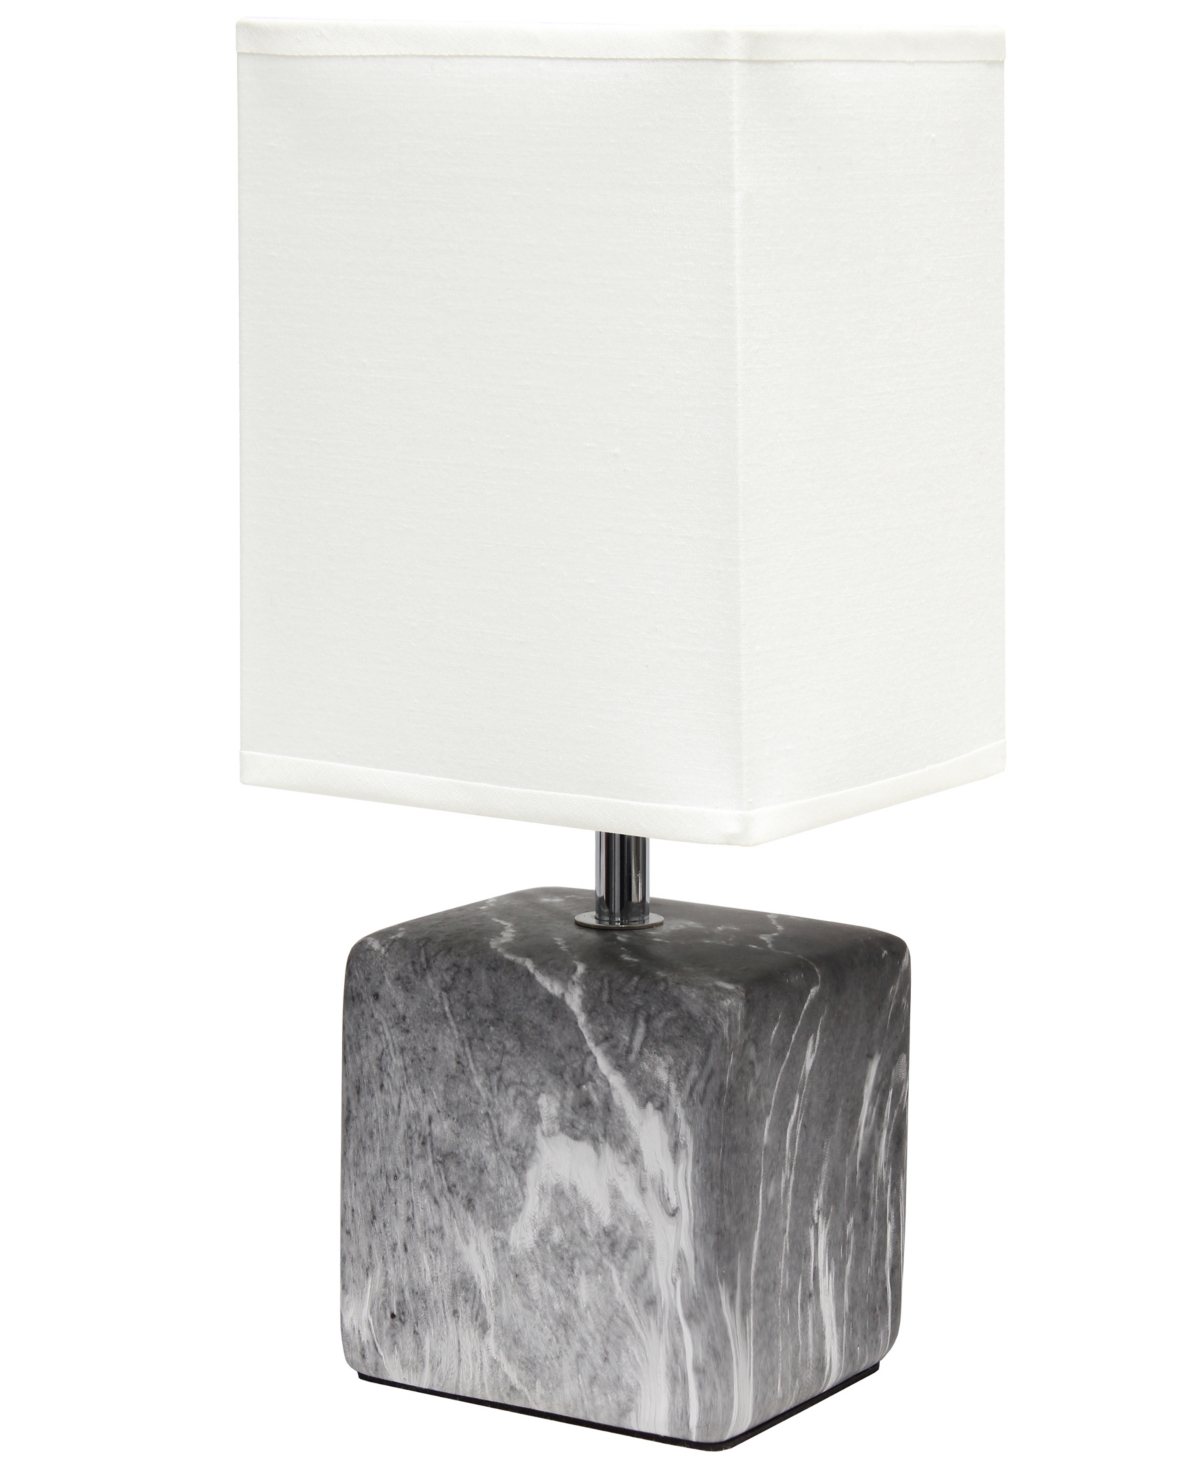 Simple Designs Petite Table Lamp With Shade In Black Base,white Shade